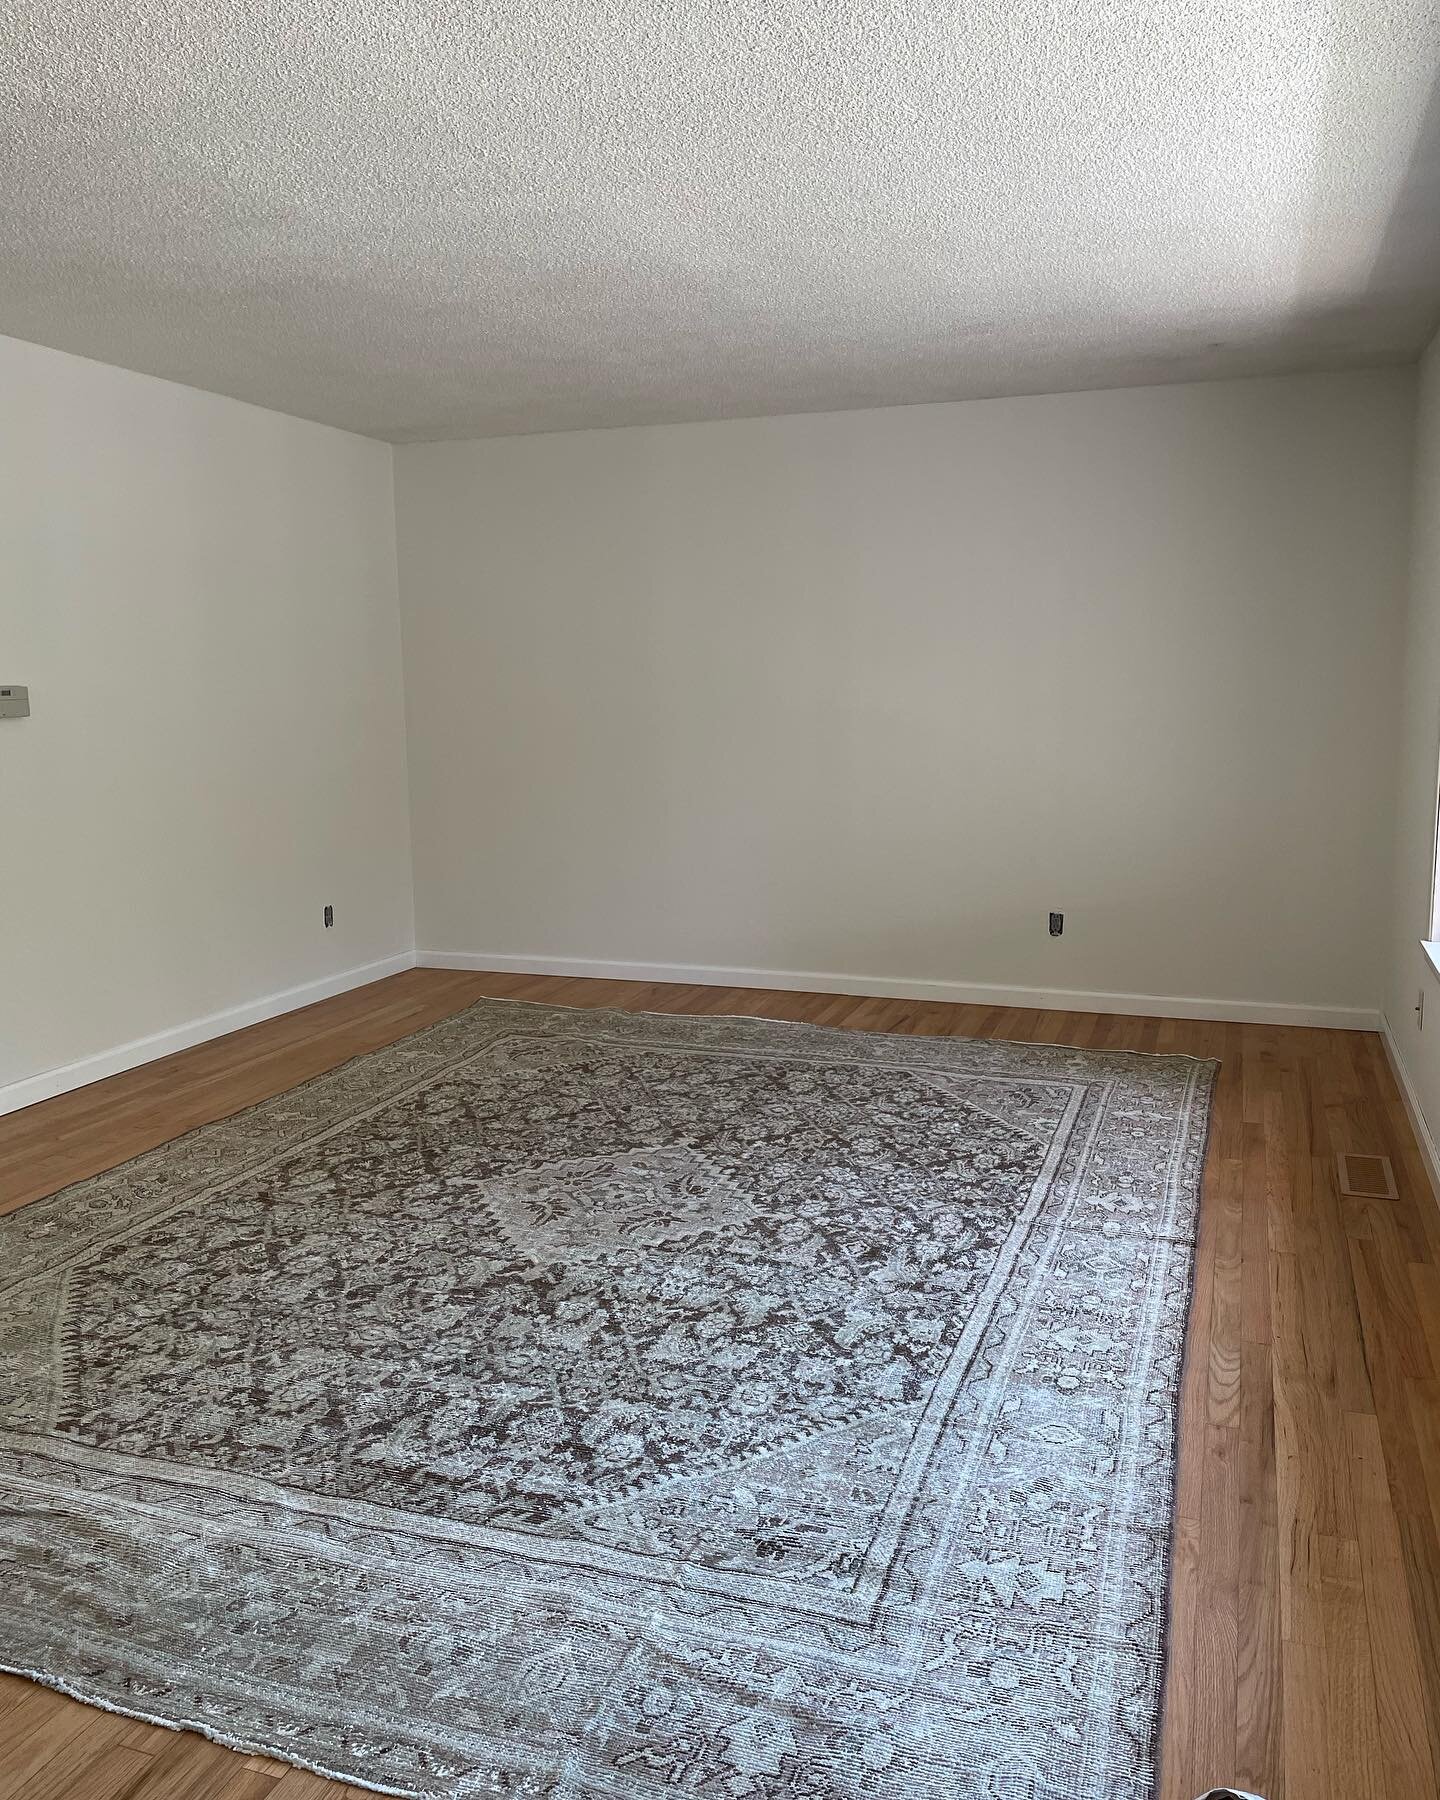 I always recommend to clients that, when possible, they tackle projects prior to moving in. Things like painting and flooring are so much easier to manage without furniture and belongings in the home. When we moved into our new (old) home last summer